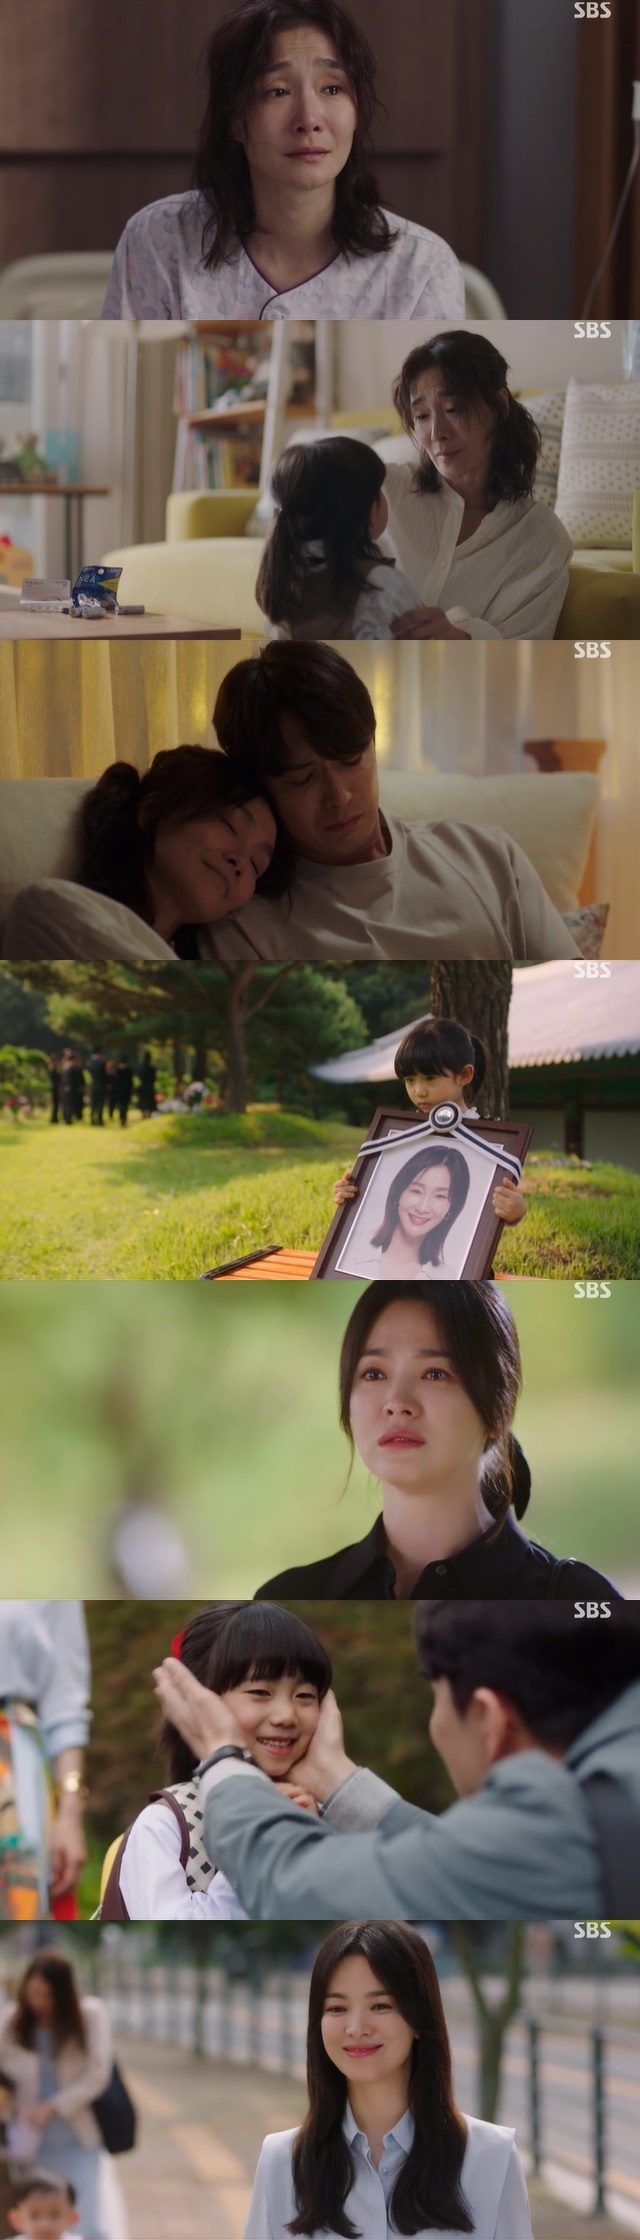 Park Hyo-joo, who was battling pancreatic cancer, eventually died over his young daughter.In the 15th episode of SBS gilt drama Now, We Are Breaking Up (playplayplay by Jane, directed by Lee Gil-bok), which was broadcast on January 7, Jeon Mi-sook (Park Hyo-joo), who shares his farewell greetings with his family, was portrayed.On this day, Jeon Mi-sook was transferred to the surrounding tissue and the symptoms became serious. The situation started even with blood, and Jeon Mi-sook was just worried about his daughter Jimin.Jeon Mi-sook said, Jimin picks clothes to wear at the entrance ceremony and takes a habit of washing alone. There are so many places to go. I am sorry for Jimin.Her husband, Kwak Suho (Yoon Na-moo), said, I can do it.Jeon Mi-suk fell down as cancer spread to his stomach.Friend Ha Young (Song Hye-kyo) and Hwang Chi-sook (Choi Hee-seo), who rushed to the hospital after receiving a call from Kwak Suho, said that they had not much time left to live from the doctor.Ha Young, Hwang Chi Sook recommended the hospitalization of Jeon Mi Sook, but Jeon Mi Sook said that Jimin had a lot of things to do. I am my mother. I am still my mother.In the end, Jeon Mi-sook refused to cure all his life and filled the end of his life with his daughter Jimin and his family.In the meantime, Jeon Mi-sook prepared Jimin to accept his separation from himself at any time.Jeon Mi-sook hugs Jimin, who has been to kindergarten, in his arms and says, Jimin may not have a mother when he goes to kindergarten.My mother is so tired and sleepy that I think I should go to bed. Jimin said he would go with his mother, but Jeon Mi-suk said, Jimin can not come until he is 100 years old. He has a lot of rice until then and he is tall.My mother is not 100 years old, said Jimin, who is asking purely, Yes, but I am so tired and sleepy.So Jimin should eat evenly. Jeon Mi-sook expressed affection to Jimin, saying, I love you. Jeon Mi-sook also greeted her husband, Kwak Suho, who expressed his gratitude for saying, Suho, I loved you so much.Kwak Suho said, I am sorry that I can not protect you even if you do anything, and I am sorry that I can not keep you.I am sorry that I can not follow you together. Jeon Mi-sook said that her husband, Kwak Suho, was Suho Shin as much as she was. Jimin takes care of her.Im sorry to have you do it all by yourself. Kwak Suho said, We are watching well. We will find out at once when we meet later. He said, I will mourn for just three days.Then I will shake my head and live your life. Kwak Suho kissed his forehead to Jeon Mi-sook, who was asleep in his arms that day.So Jeon Mi-suk left his family and friends. Nevertheless, the rest of them lived their lives.Jimin was a young child in the care of his father and Ha Young-eun. Before his visit, he greeted his mother brightly.